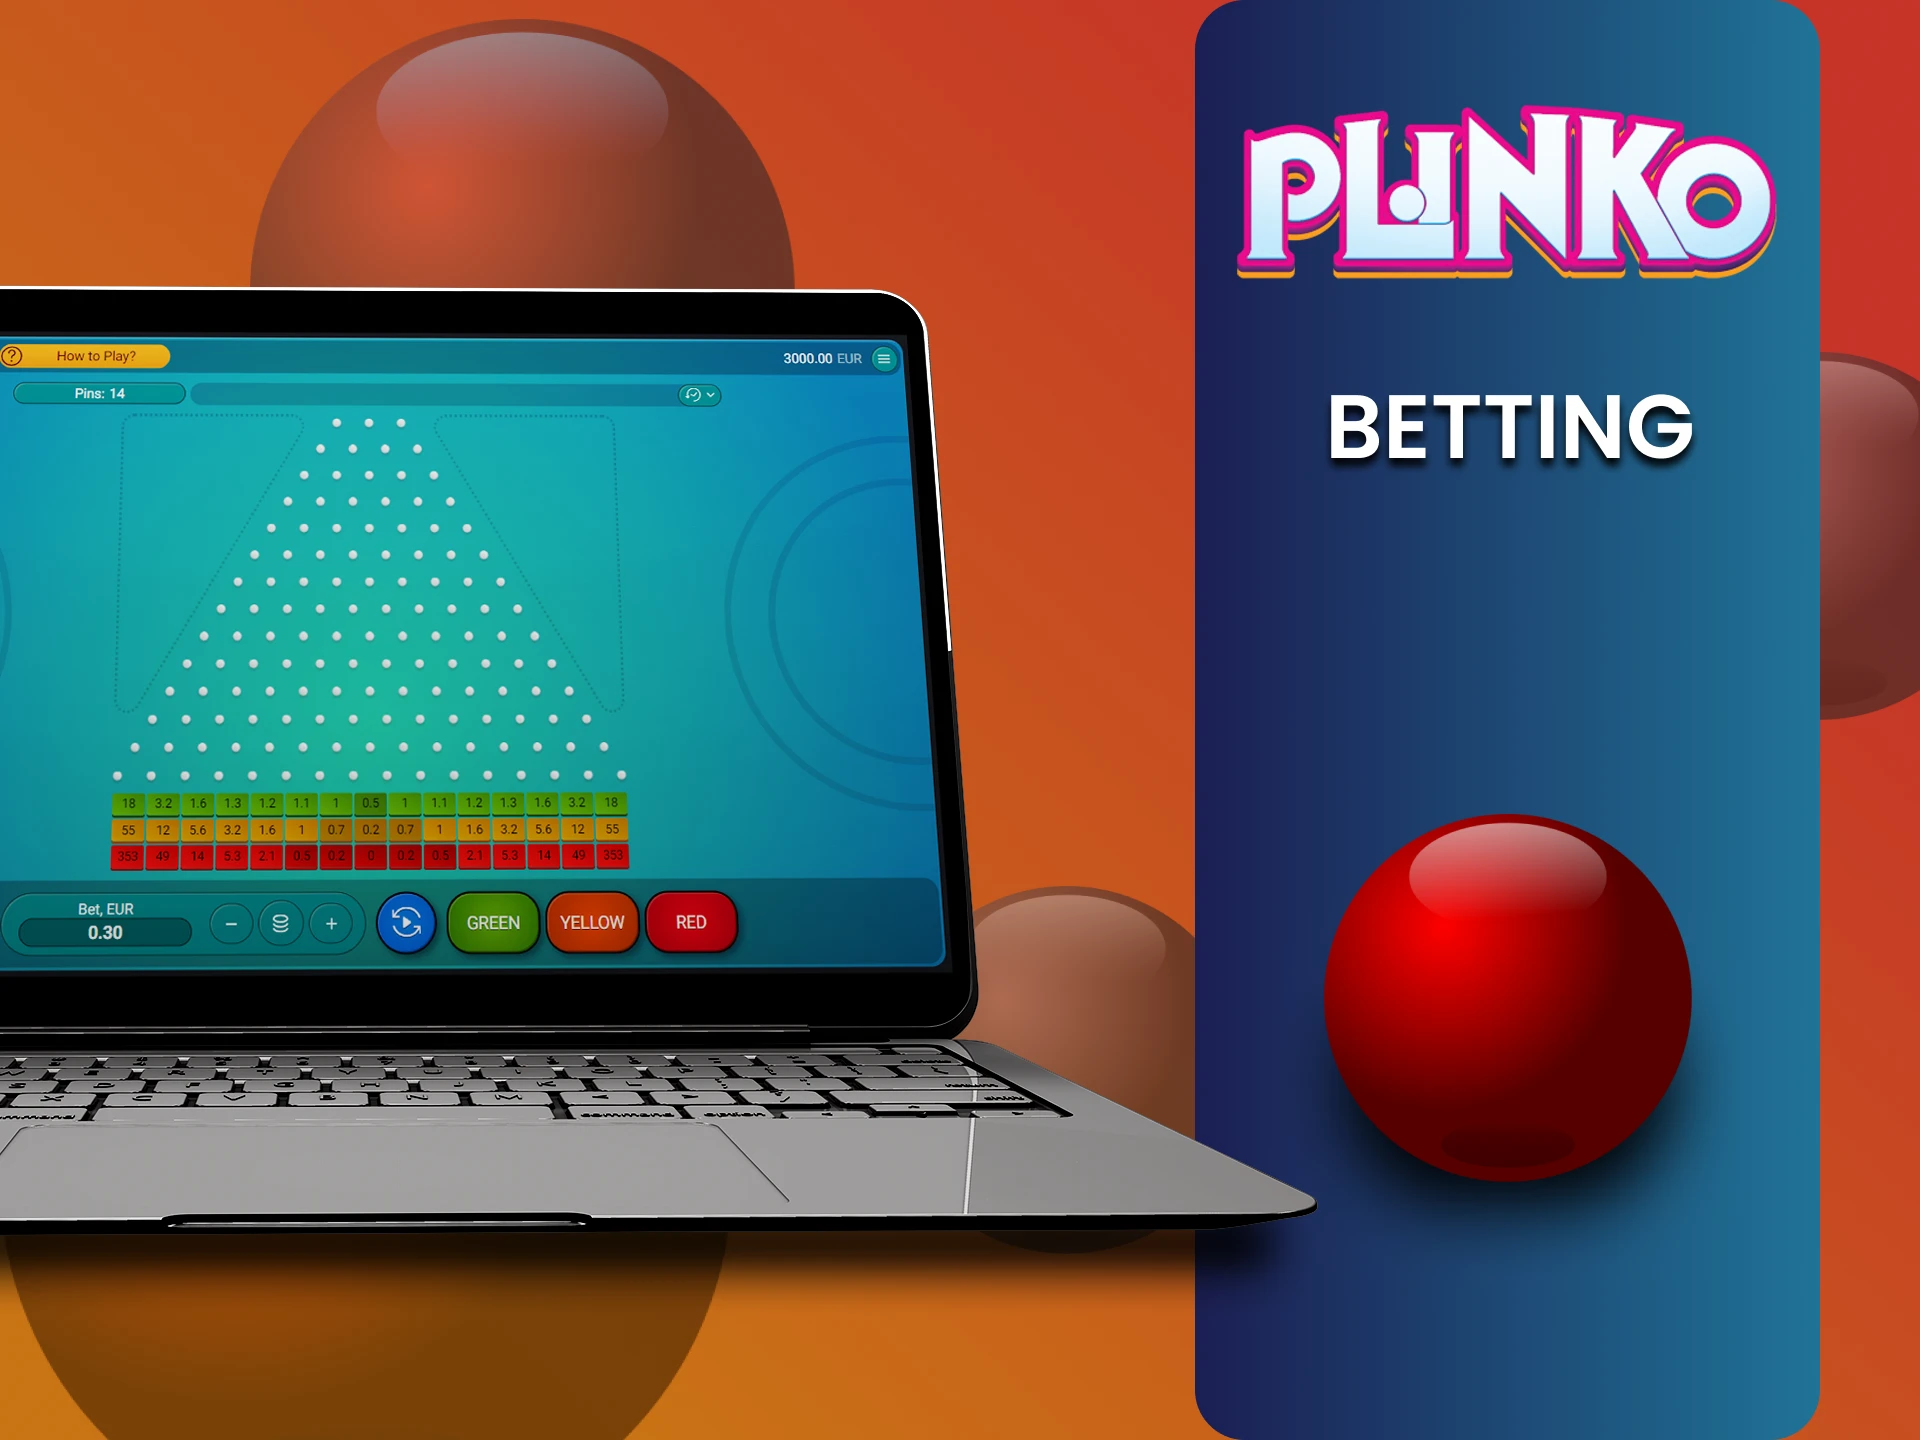 Find out what types of bets you can place on Plinko.